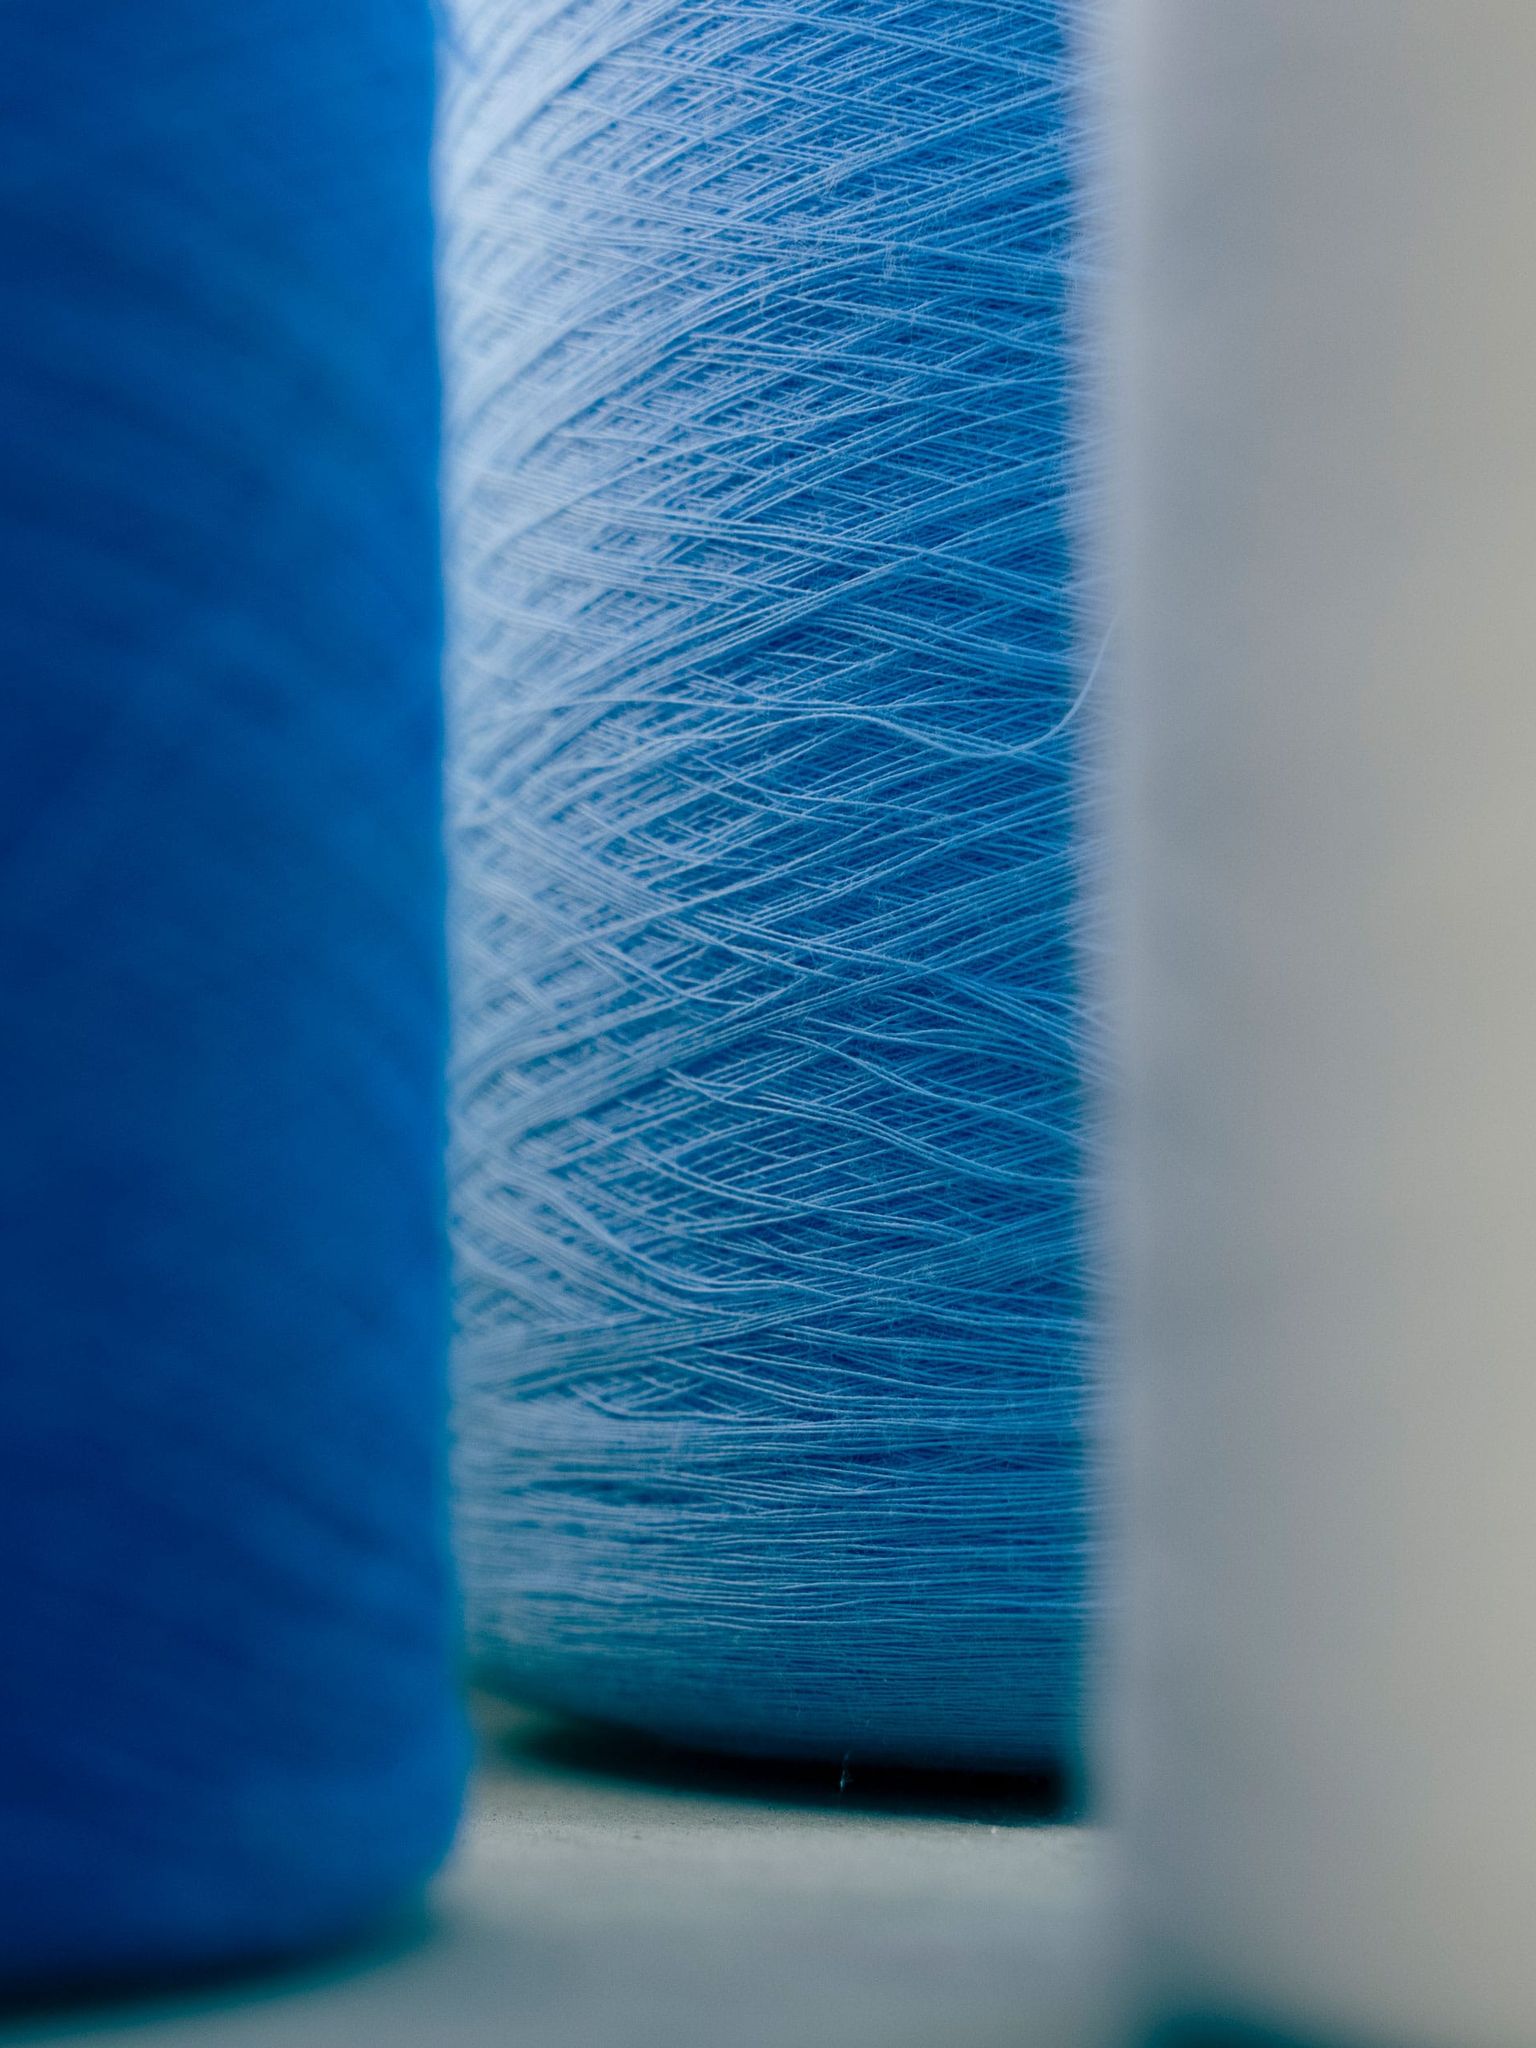 Otto Textil - Experience and expertise in yarns